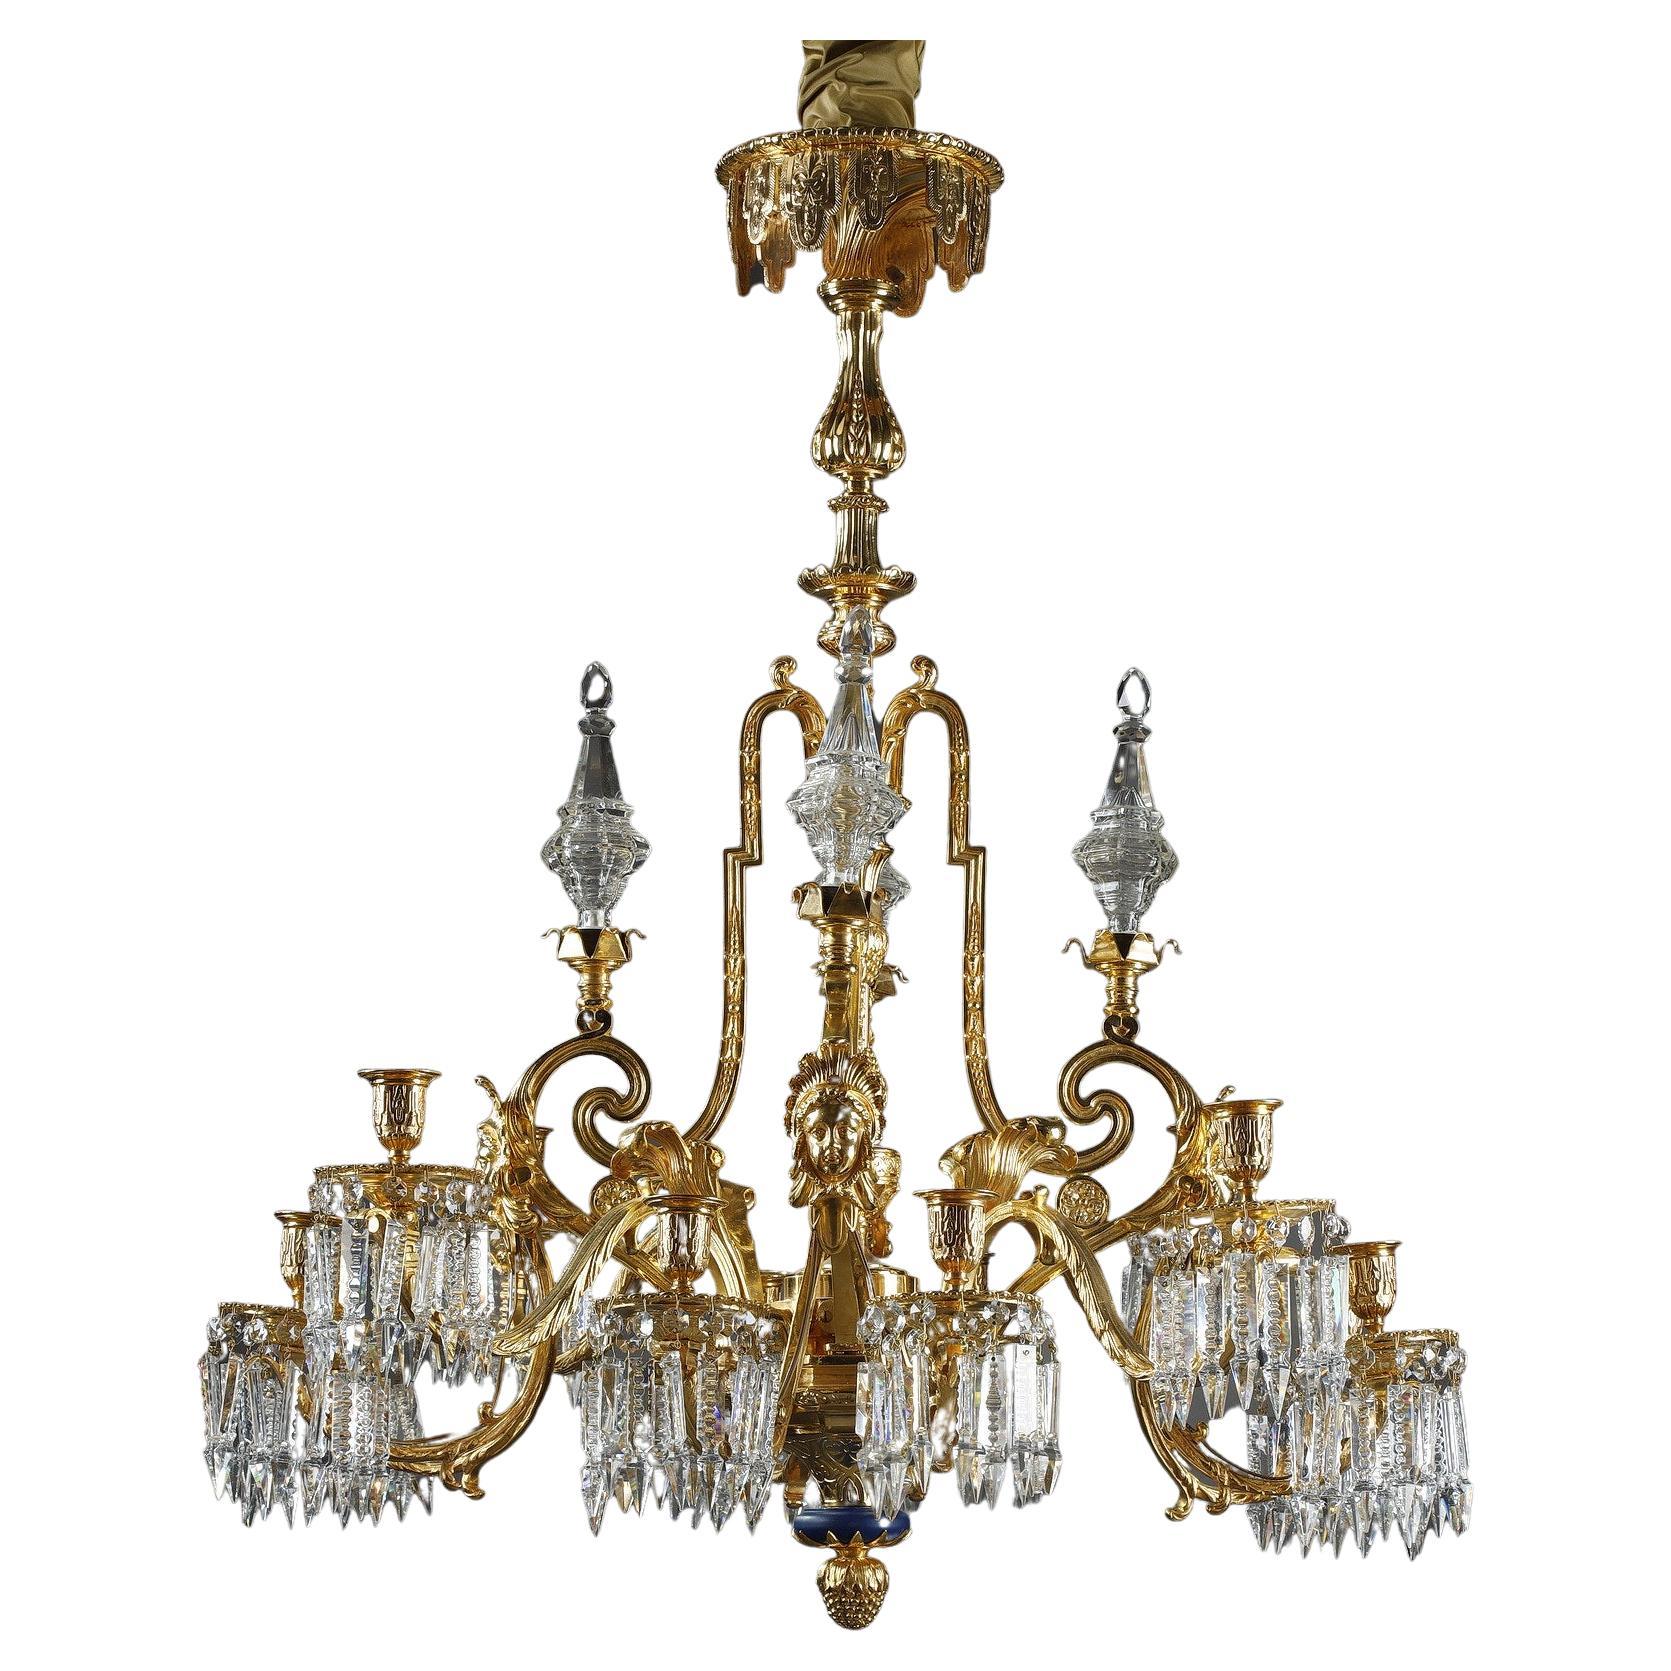 Large Chandelier with Gilt Bronze Crystals and Masks Decorations For Sale